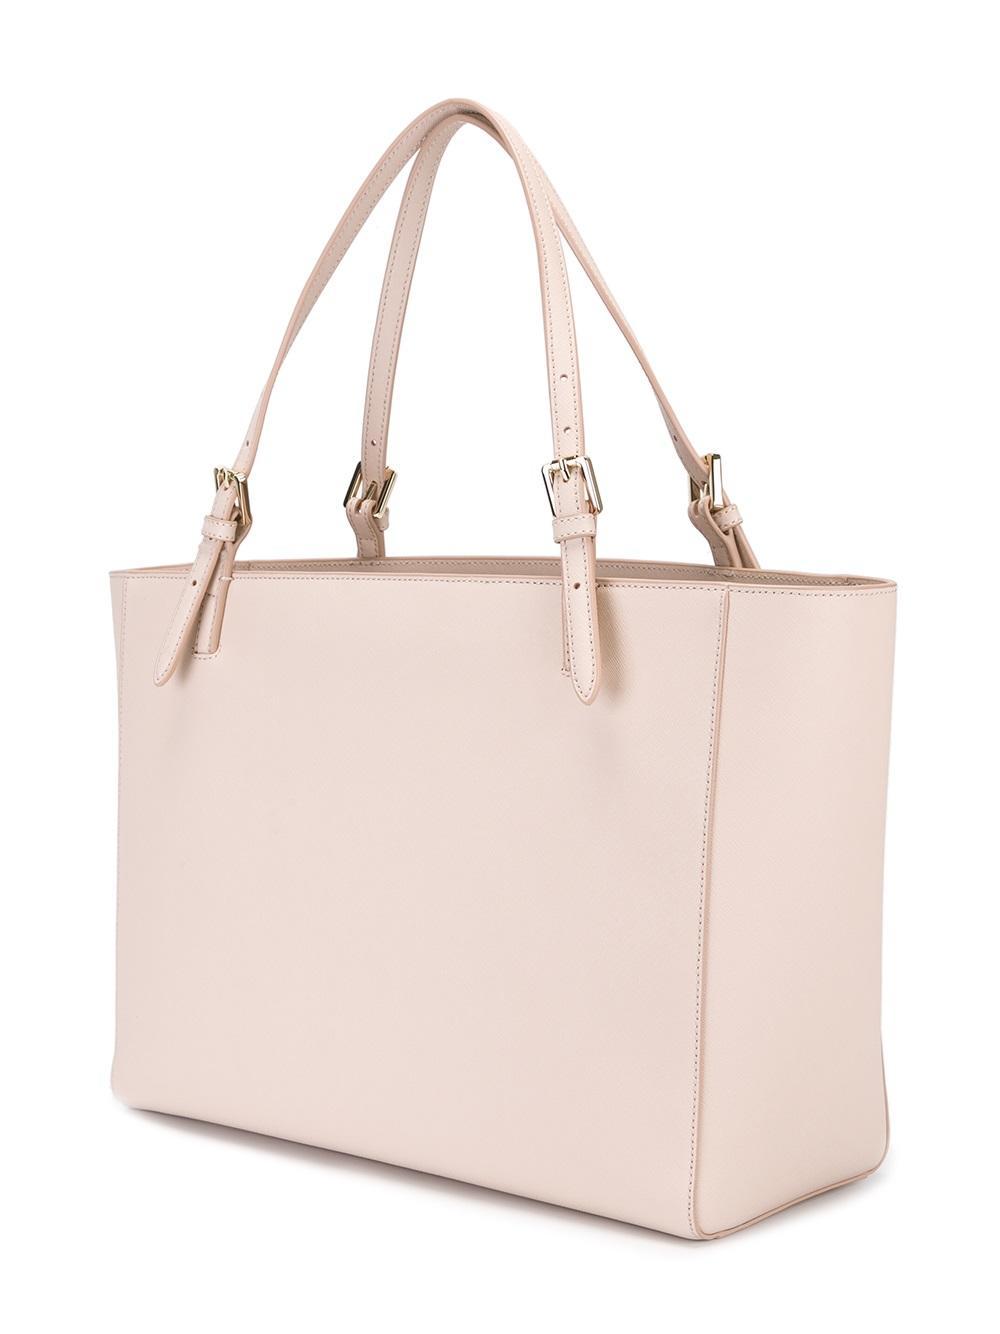 Lyst - Tory burch York Tote in Pink